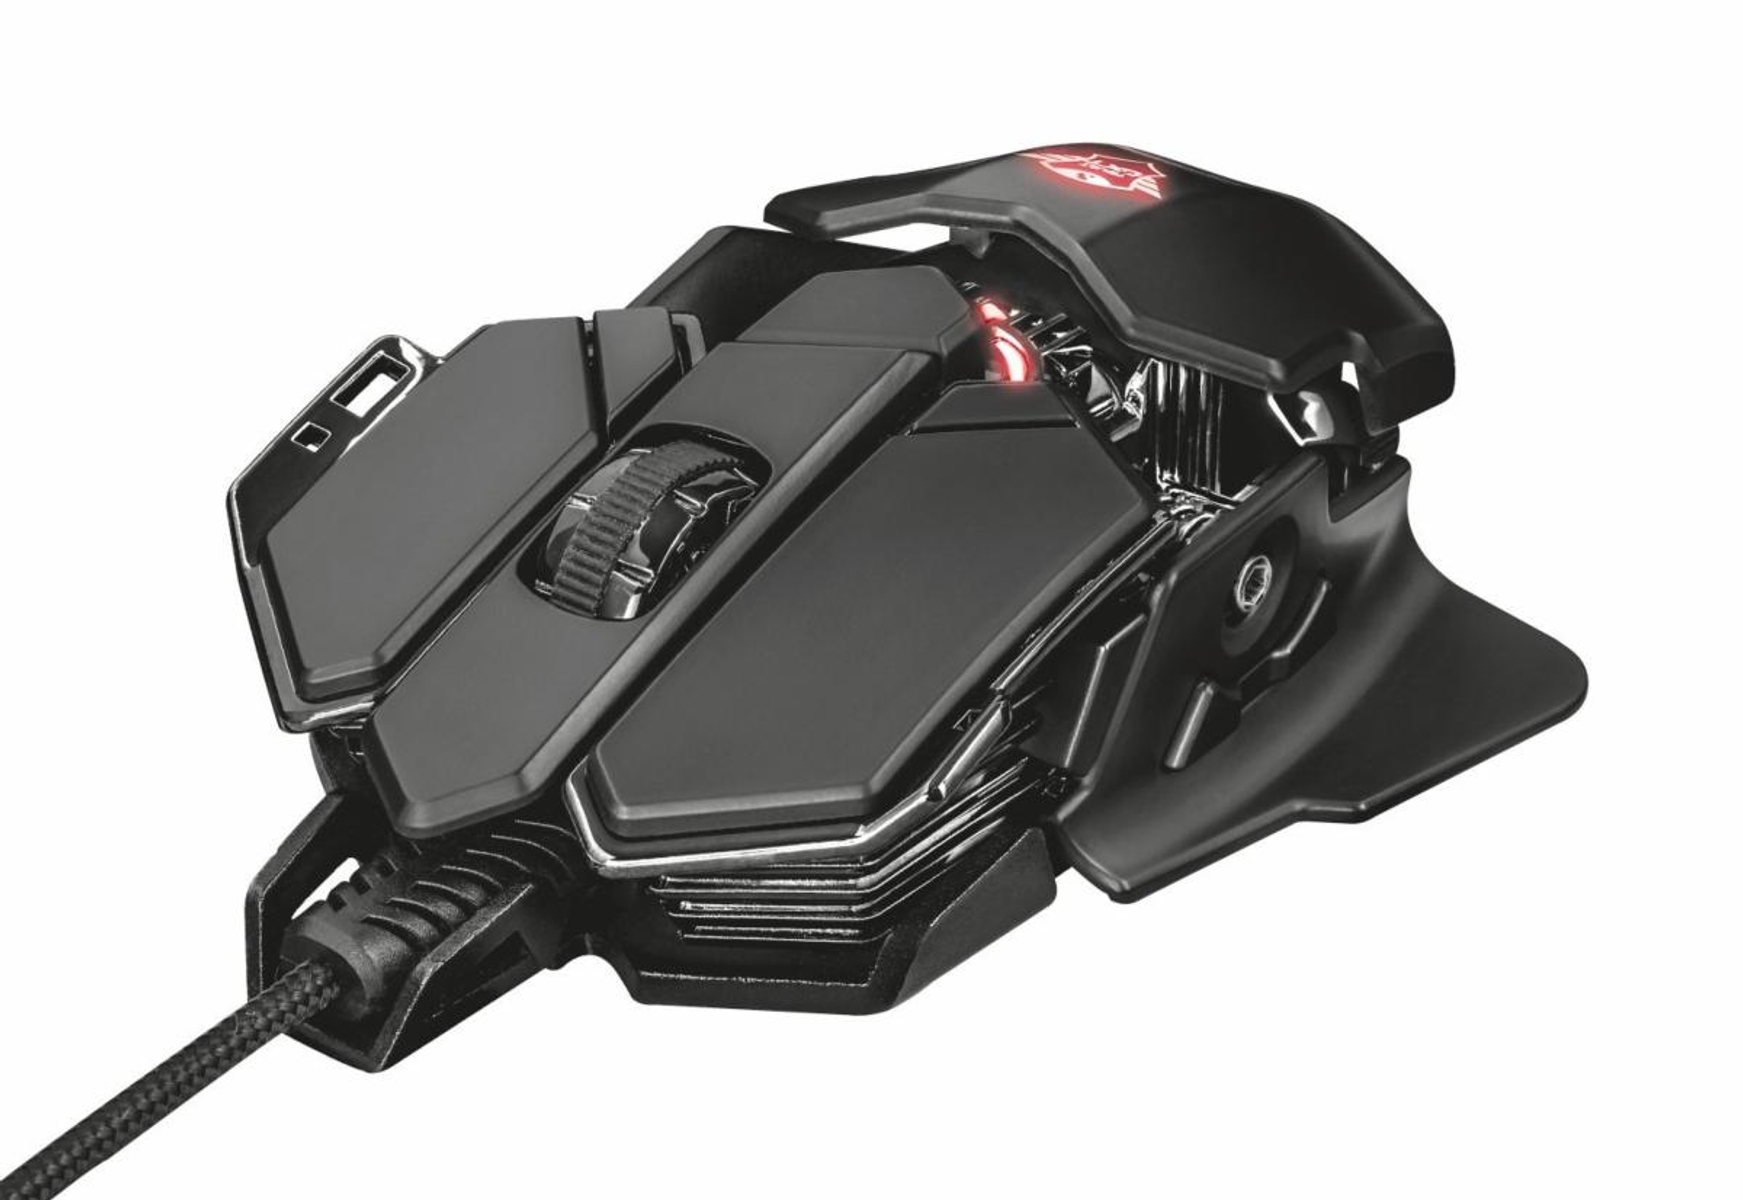 TRUST 22089 GXT 138 X-RAY MOUSE schwarz Maus, GAMING Gaming ILLUMINATED